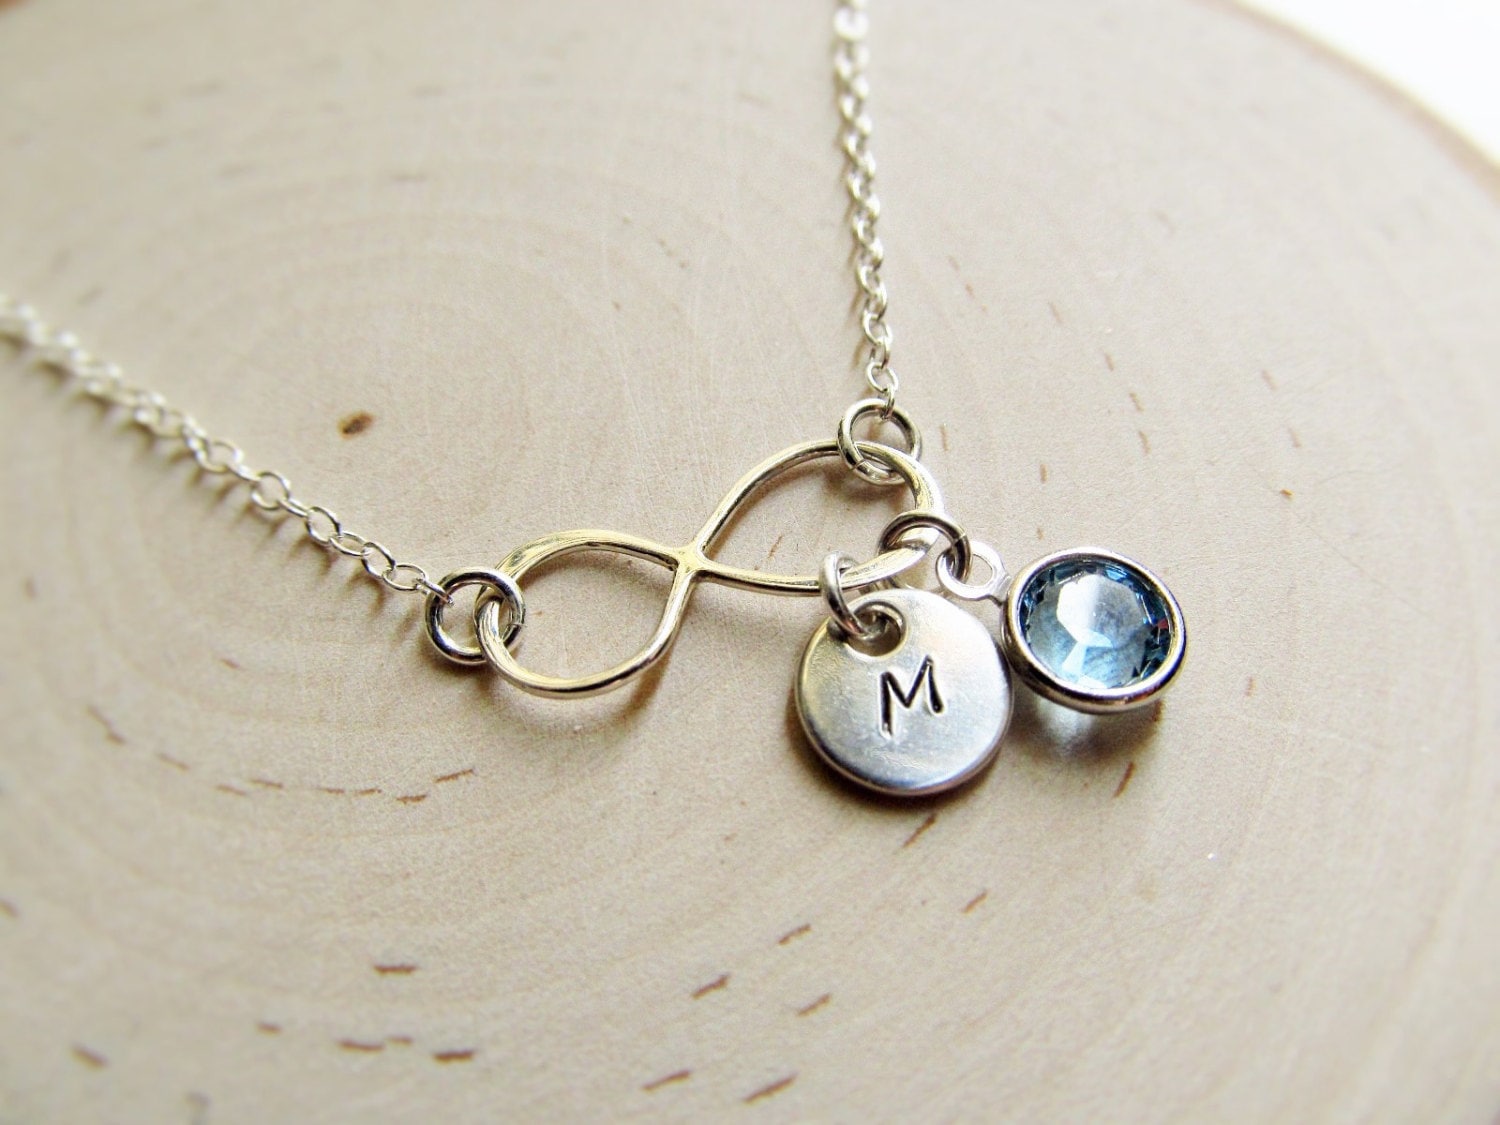 Personalized Infinity Necklace with Initial and Birthstone